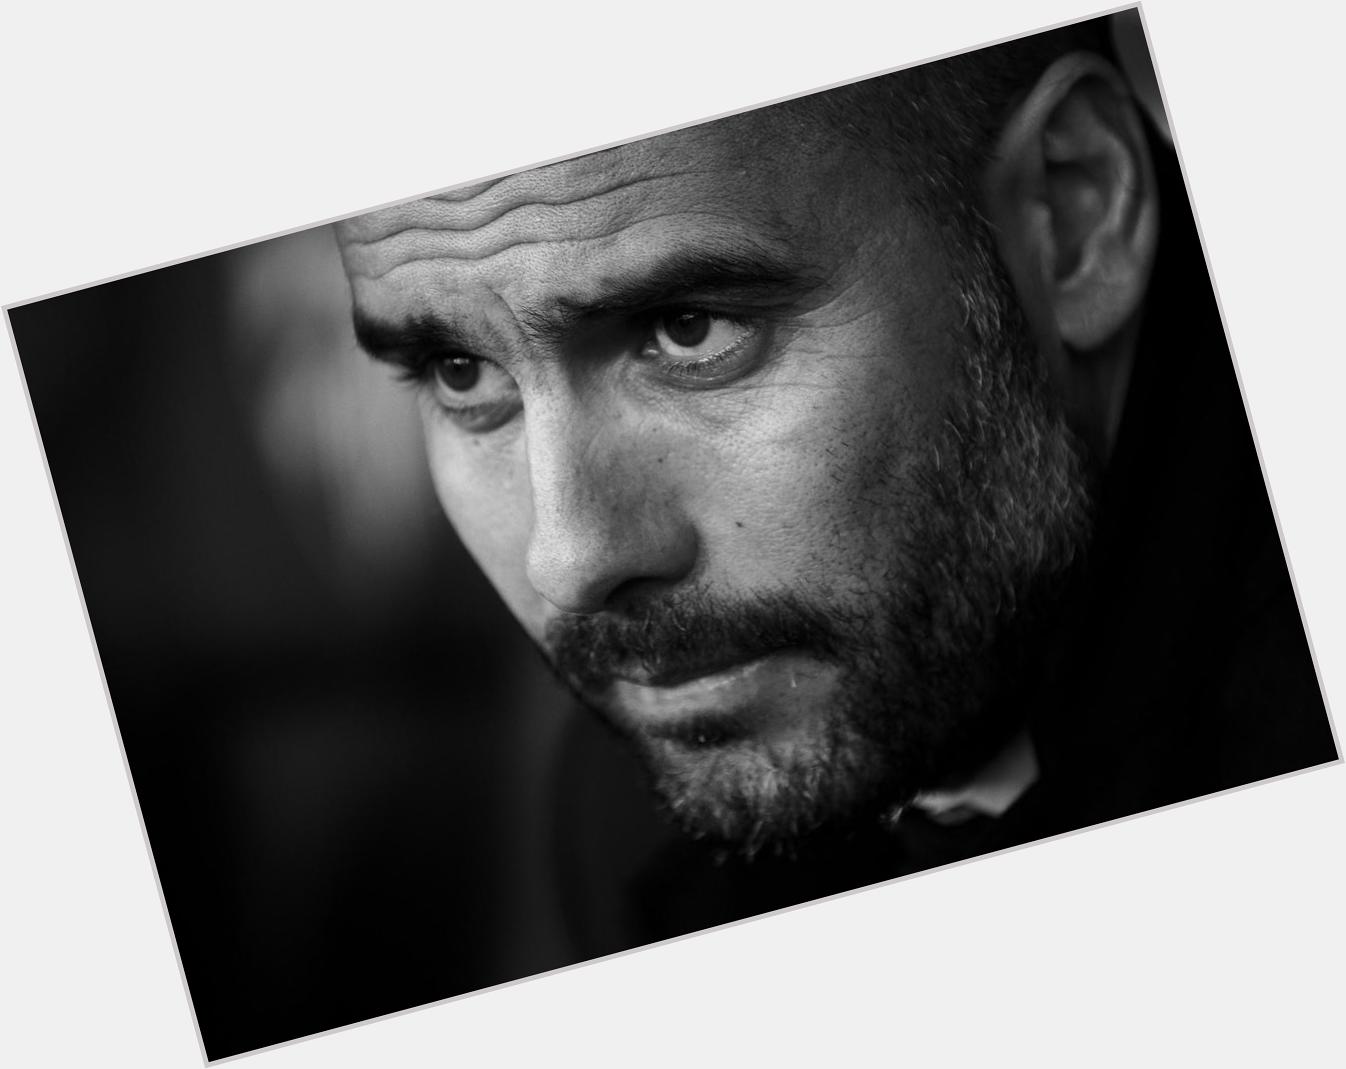 On this day 44 years ago, The Best ever was born. Happy 44th Birthday Josep Guardiola i Sala  